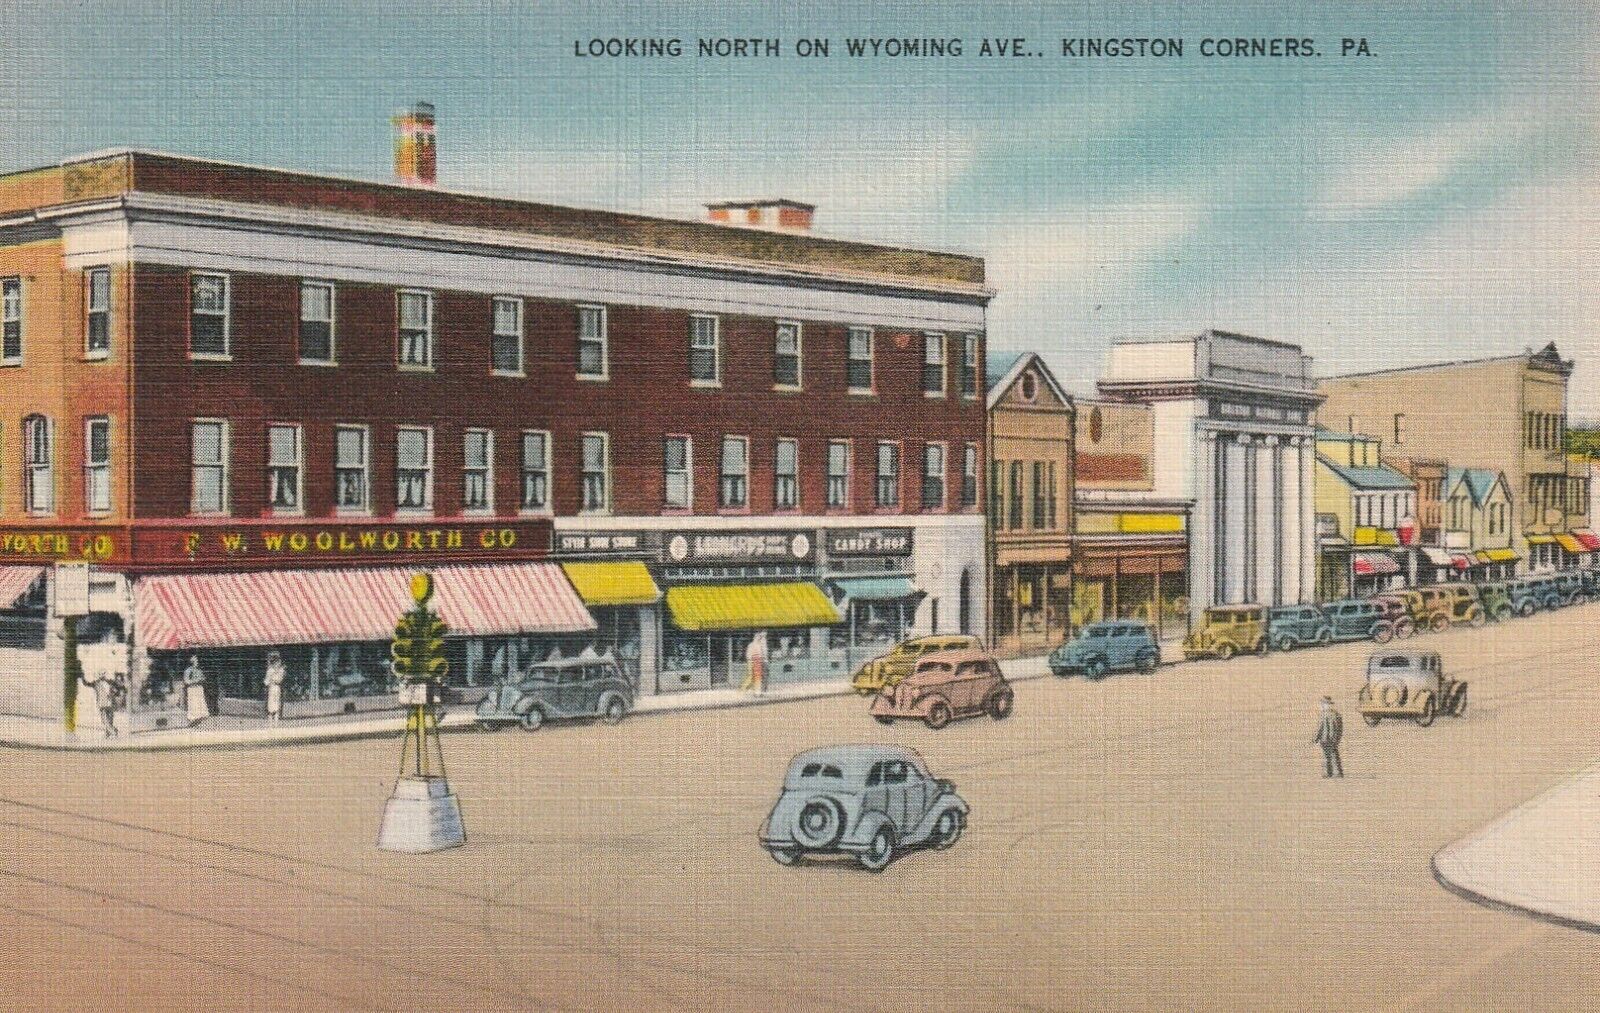 C1930s-40s  Looking North on Wyoming Ave. Kingston Corners, PA, Woolworths, a105